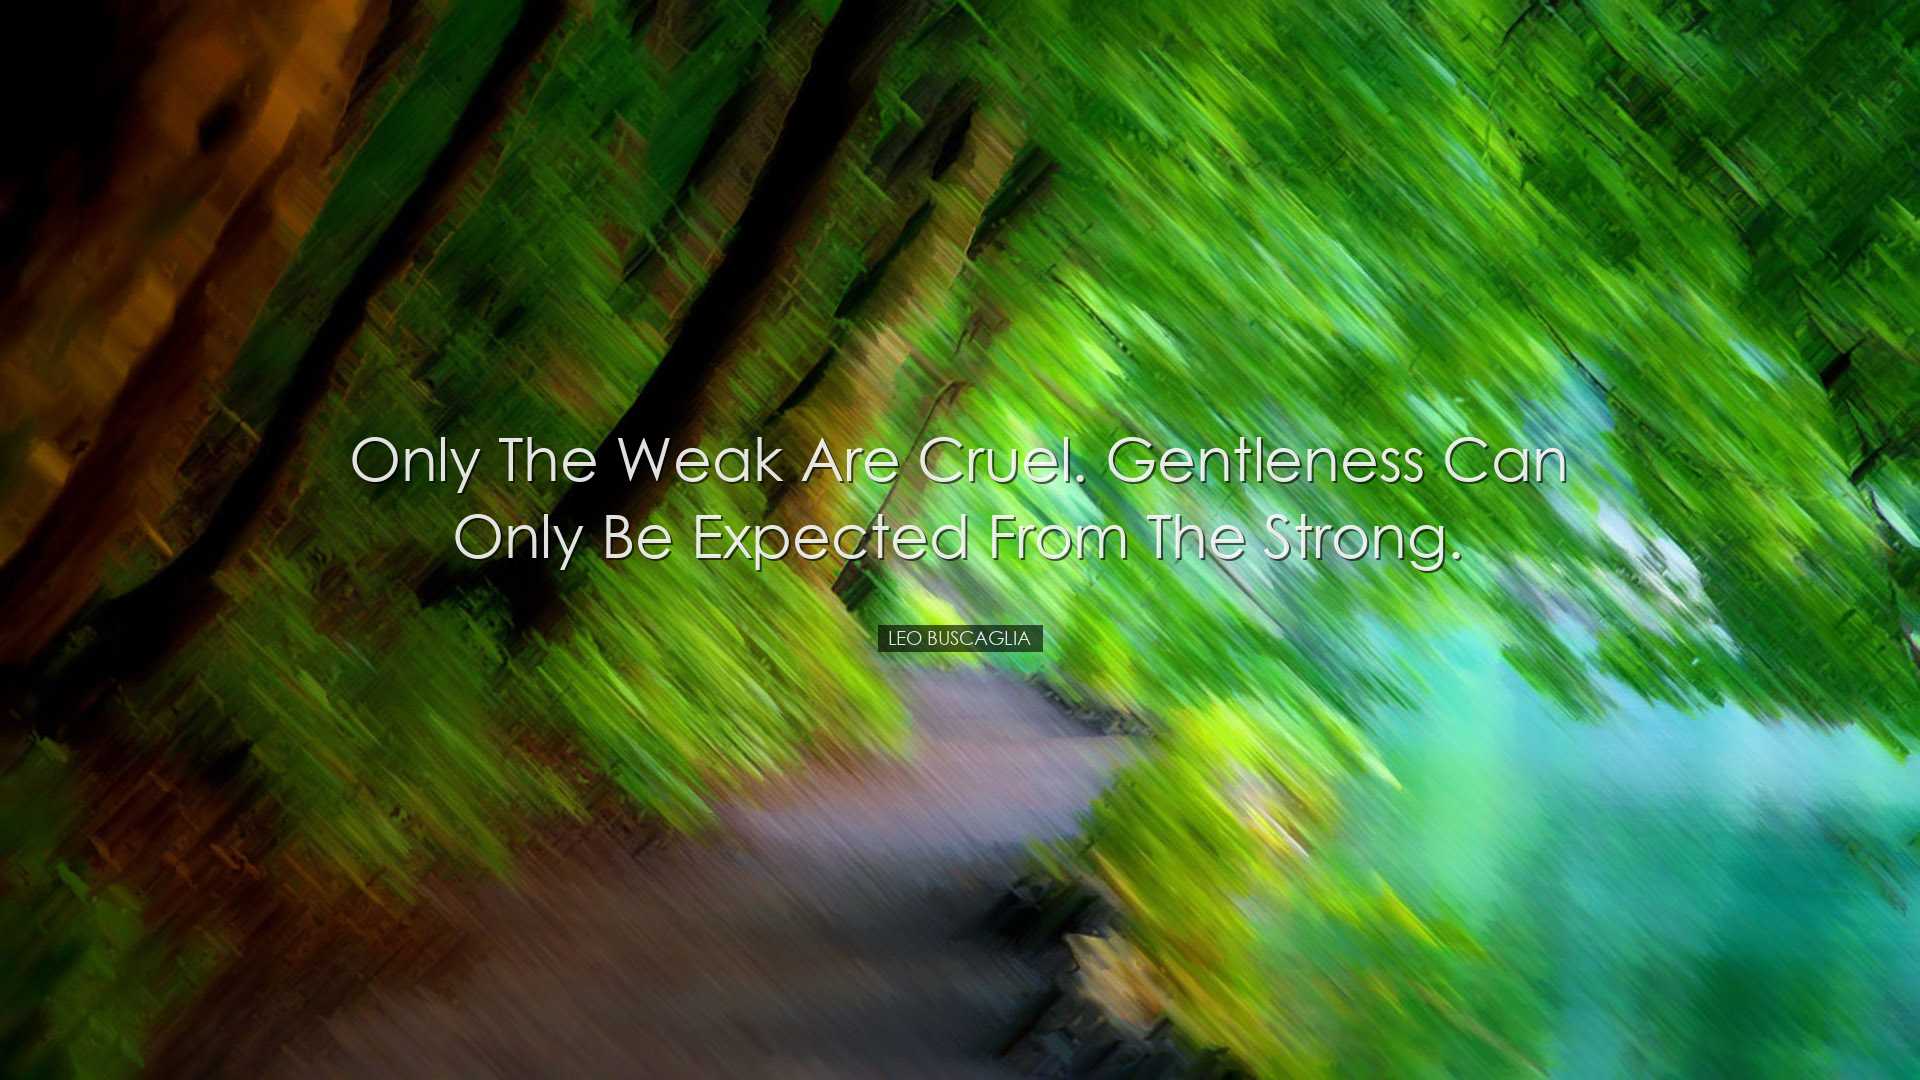 Only the weak are cruel. Gentleness can only be expected from the